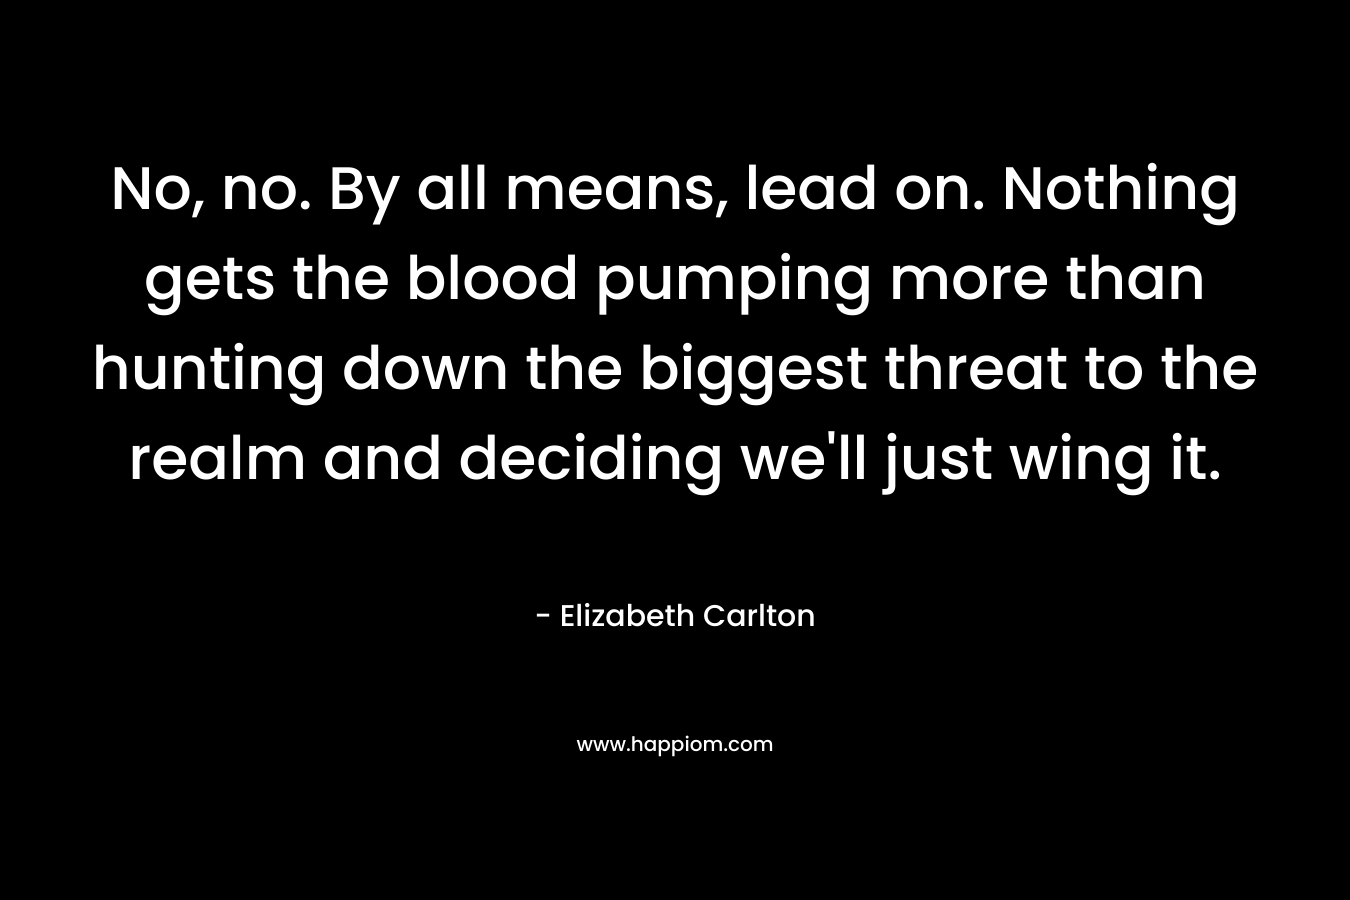 No, no. By all means, lead on. Nothing gets the blood pumping more than hunting down the biggest threat to the realm and deciding we’ll just wing it. – Elizabeth Carlton